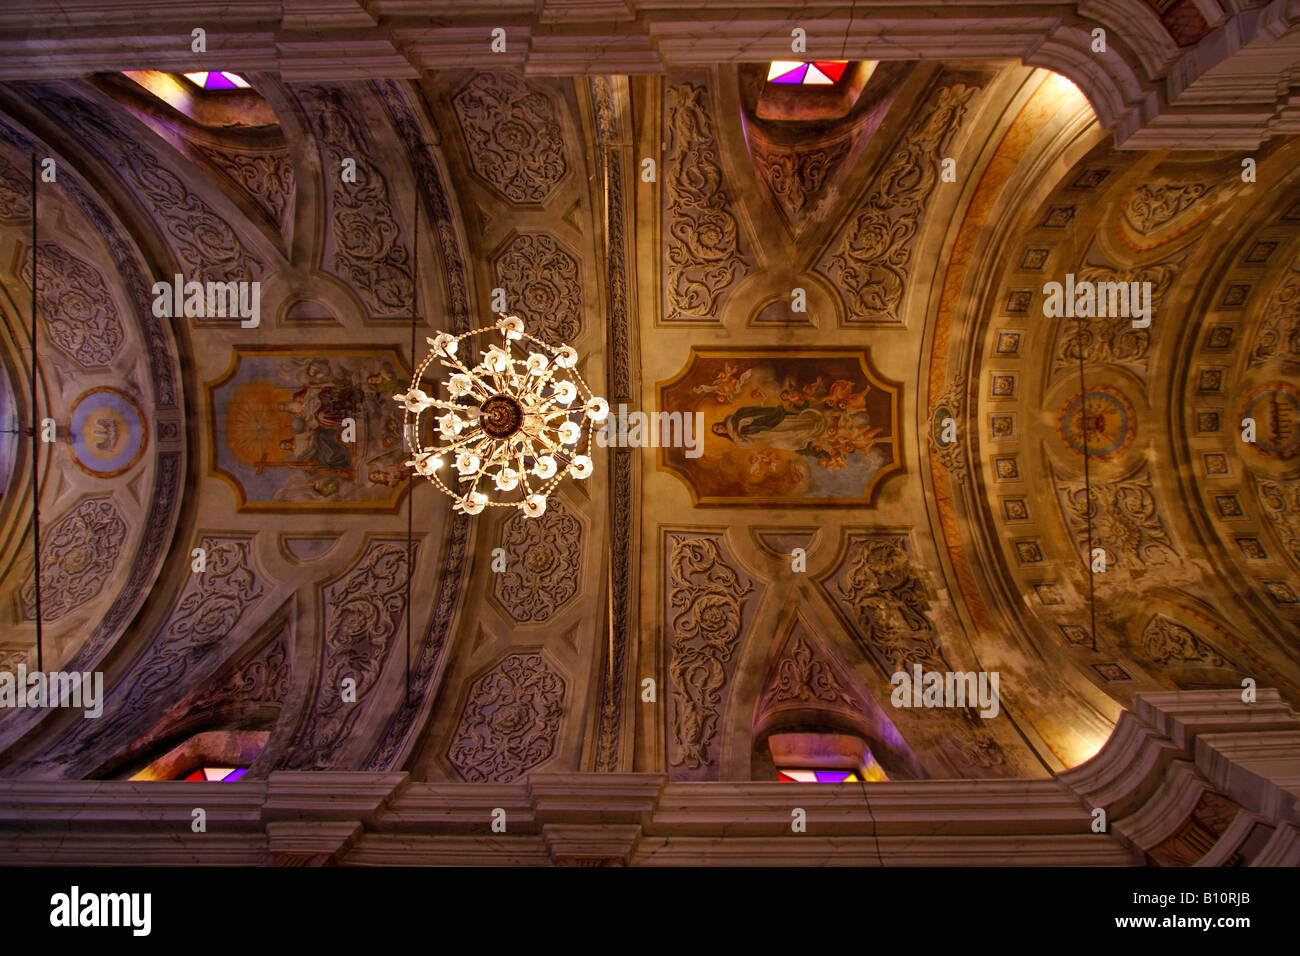 ceiling inside the roman catholic church in Cargese Corsica France Stock Photo